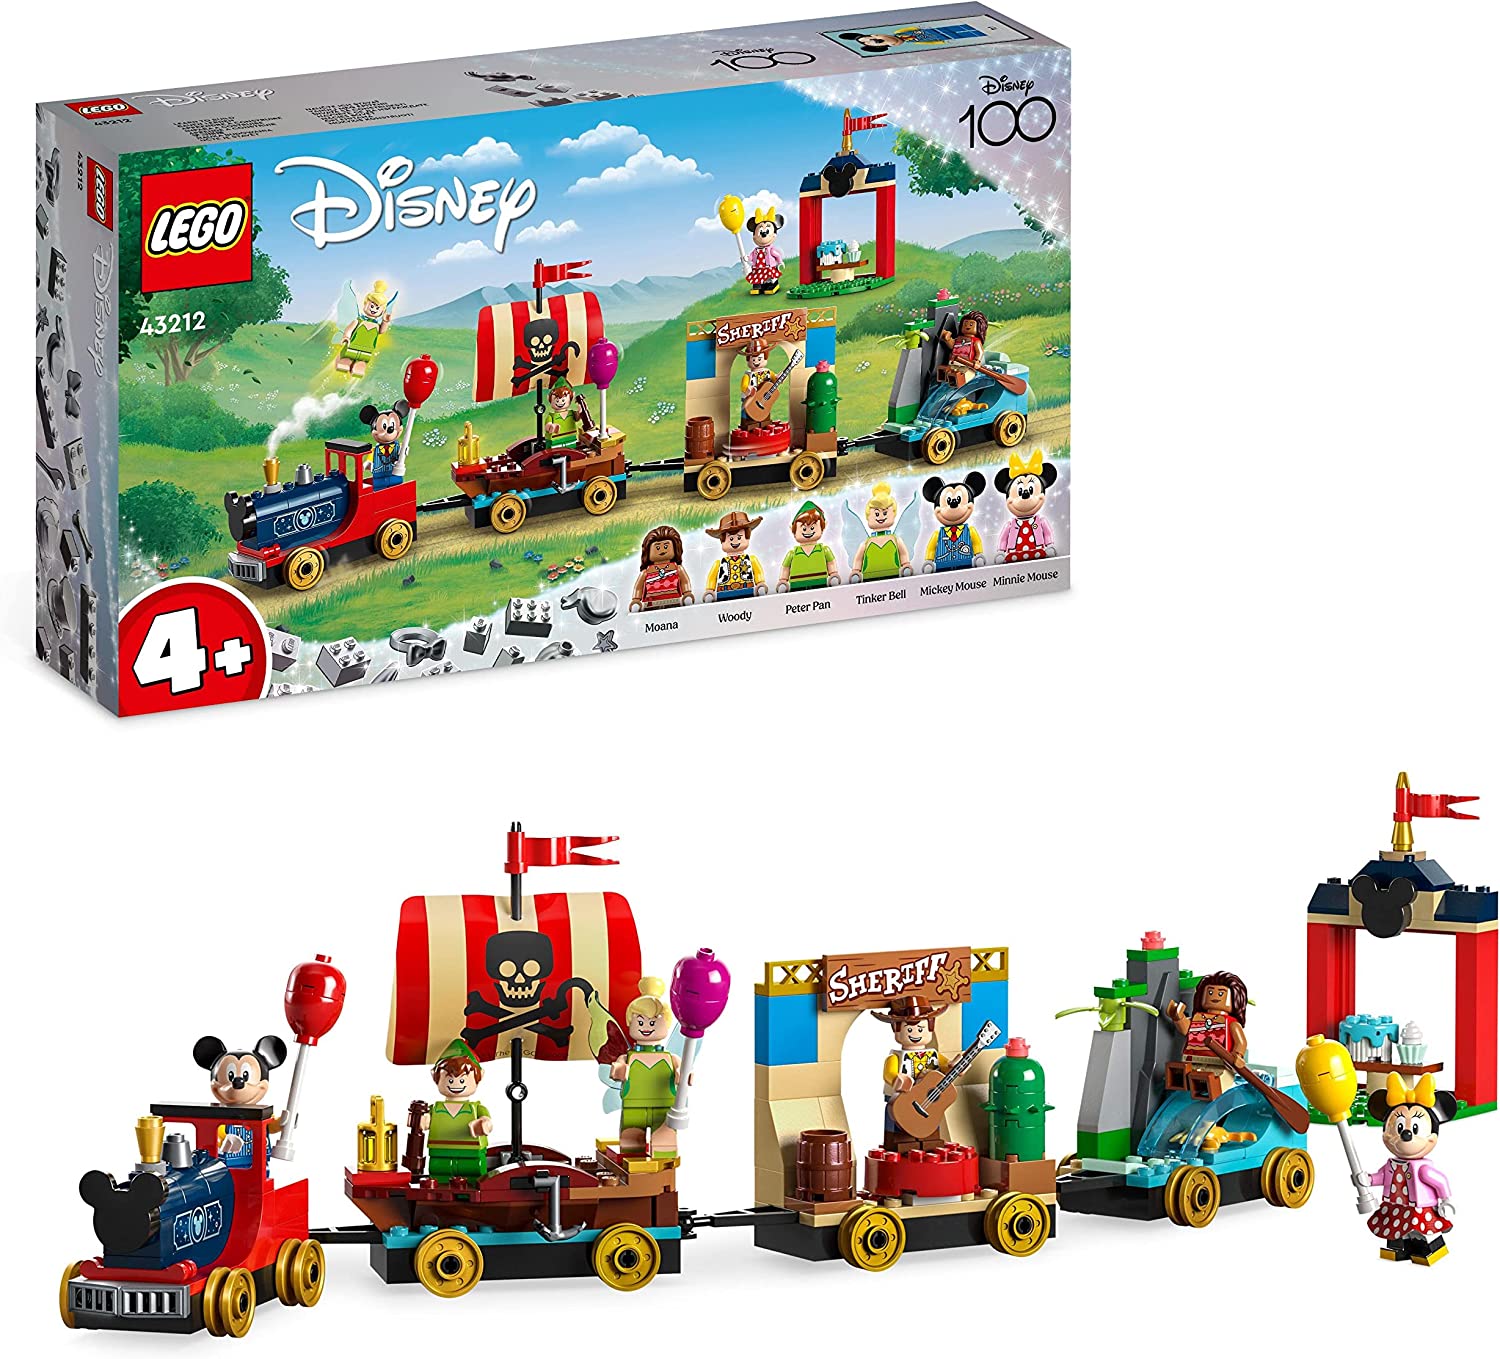 LEGO 43212 Disney Birthday Train Set with Moana, Woody, Peter Pan and Tinker Bell Train Toy Plus Mickey and Minnie Mouse for Children Aggen Aggen Aged 4 and Up Disney \ 'S 100th Birthday